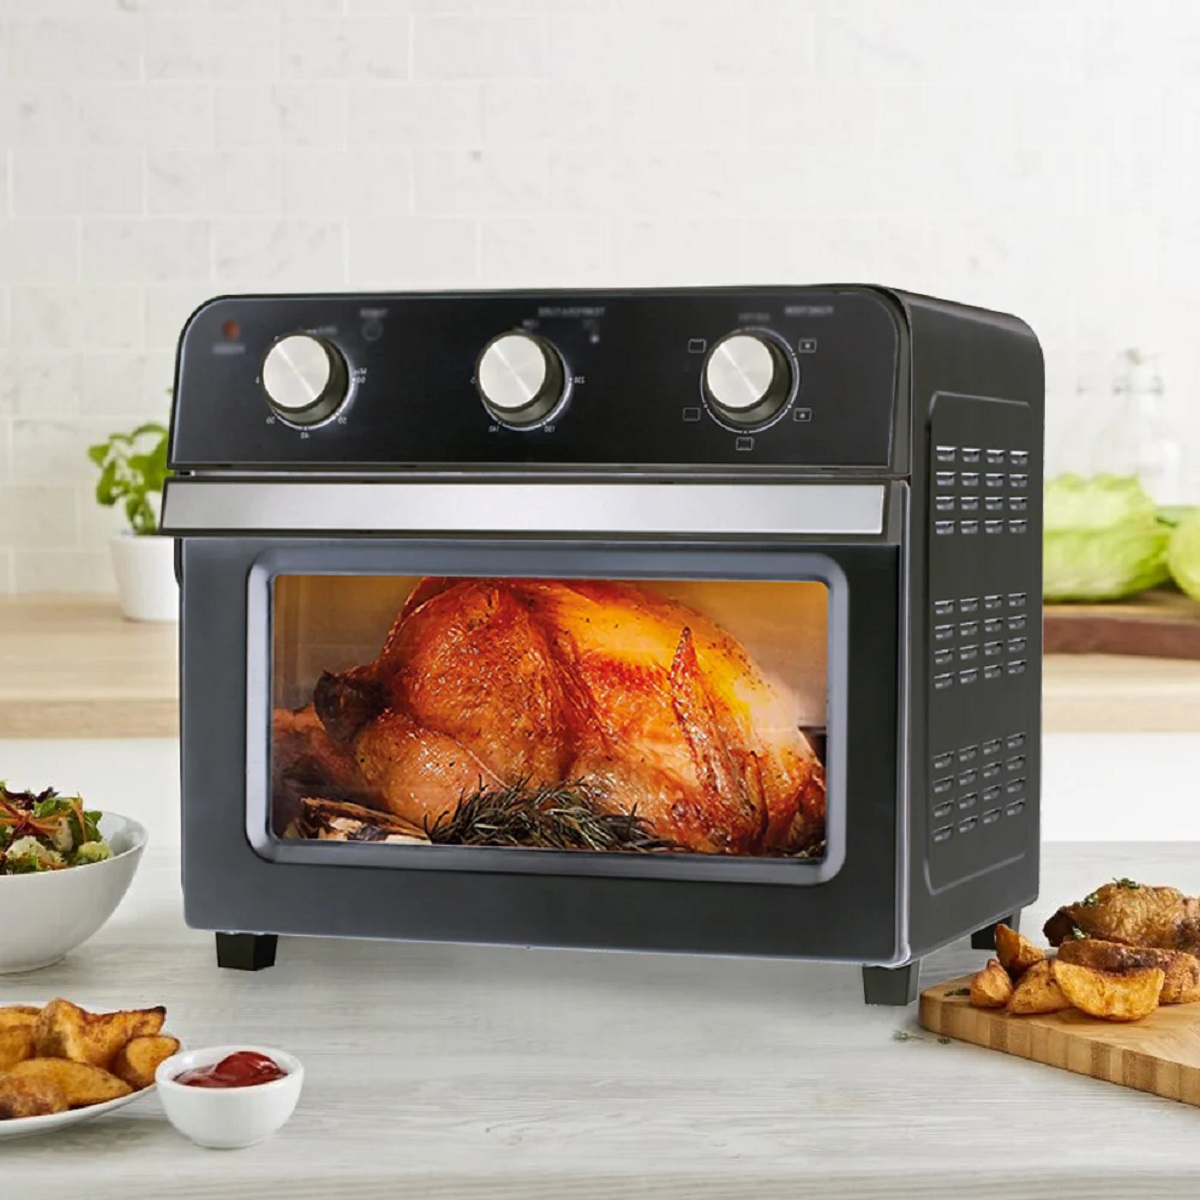 https://storables.com/wp-content/uploads/2023/07/15-amazing-air-fryer-oven-for-2023-1690374508.jpg